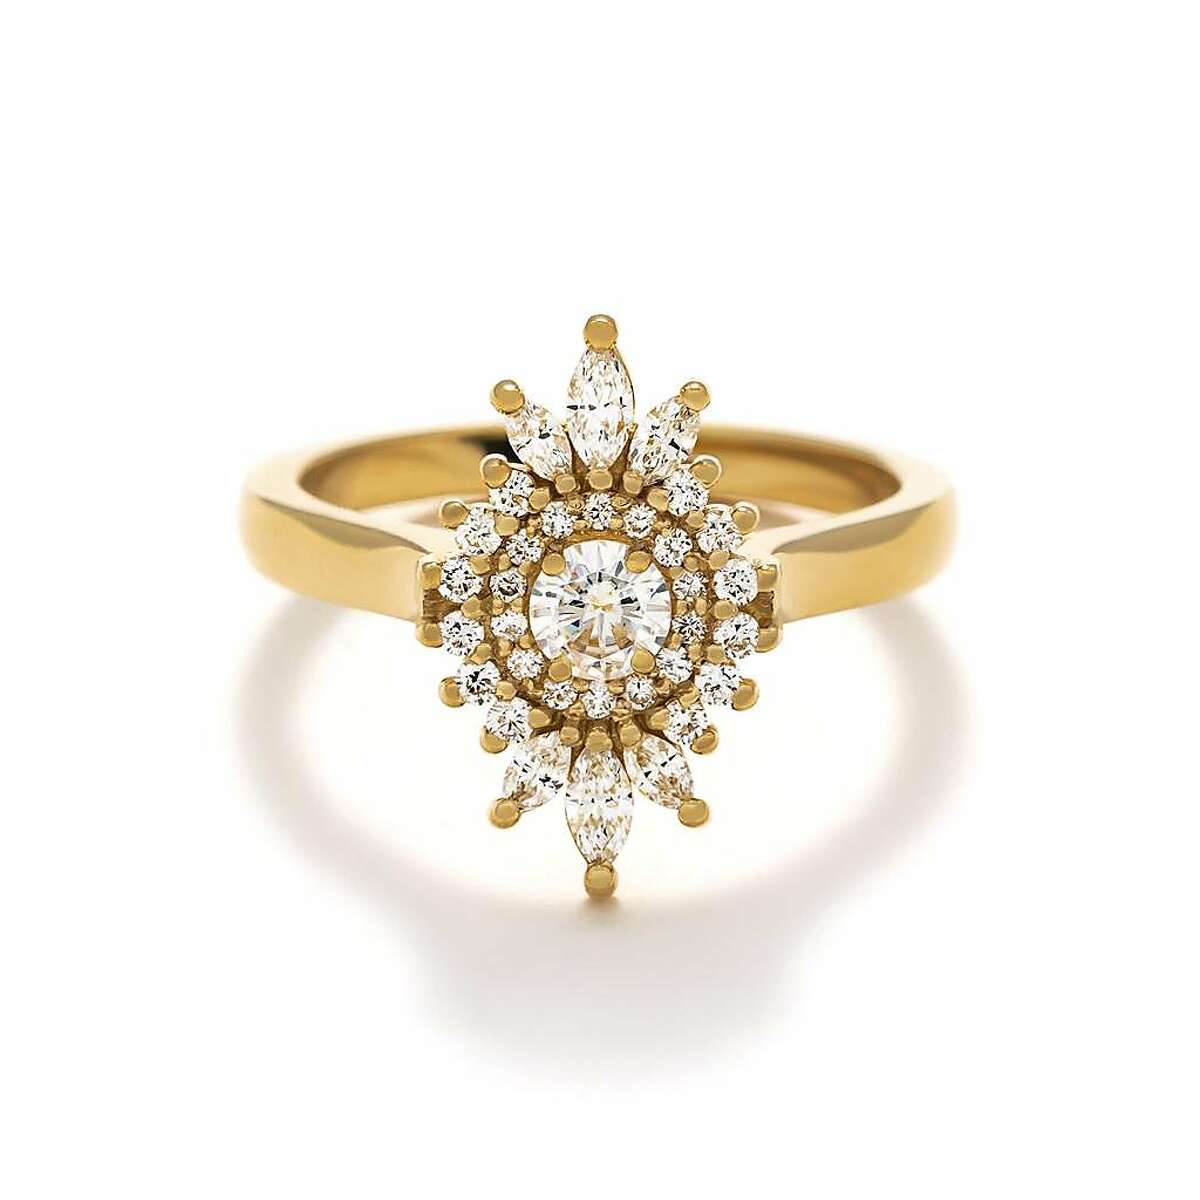 Named after Brooke deDiego Miller's grandmother, Beverly, the ring features marquise and round diamonds that amplify a quarter-carat round diamond ($4.450). Made in yellow, palladium white and rose gold. It's part of Porter Gulch's recent capsule bridal collection.